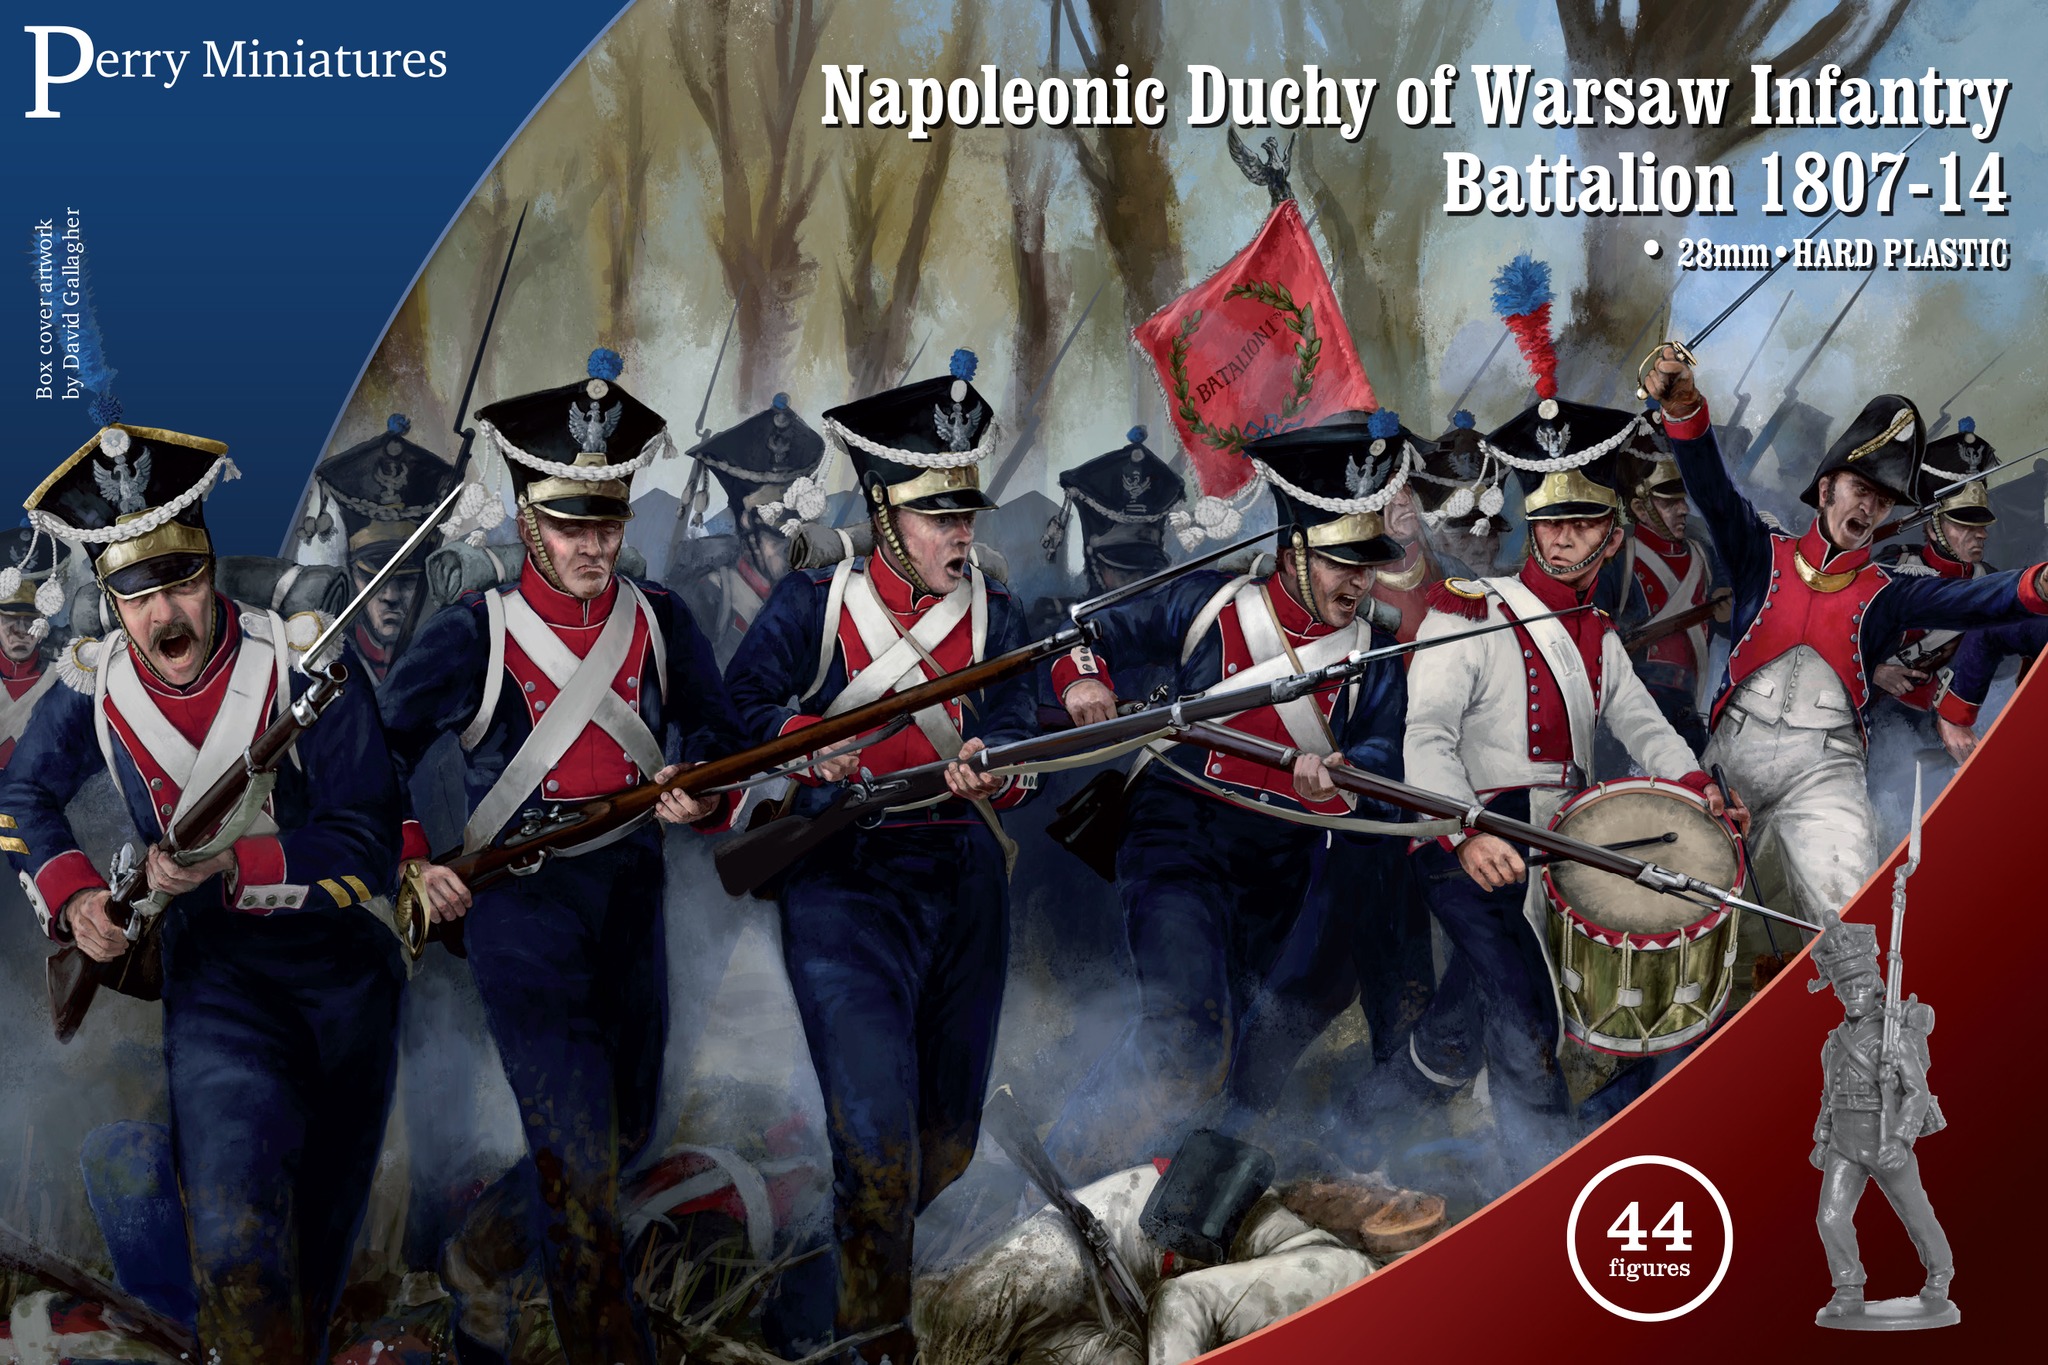 [Image: Duchy-Of-Warsaw-Infantry-Battalion-Perry-Miniatures.jpg]